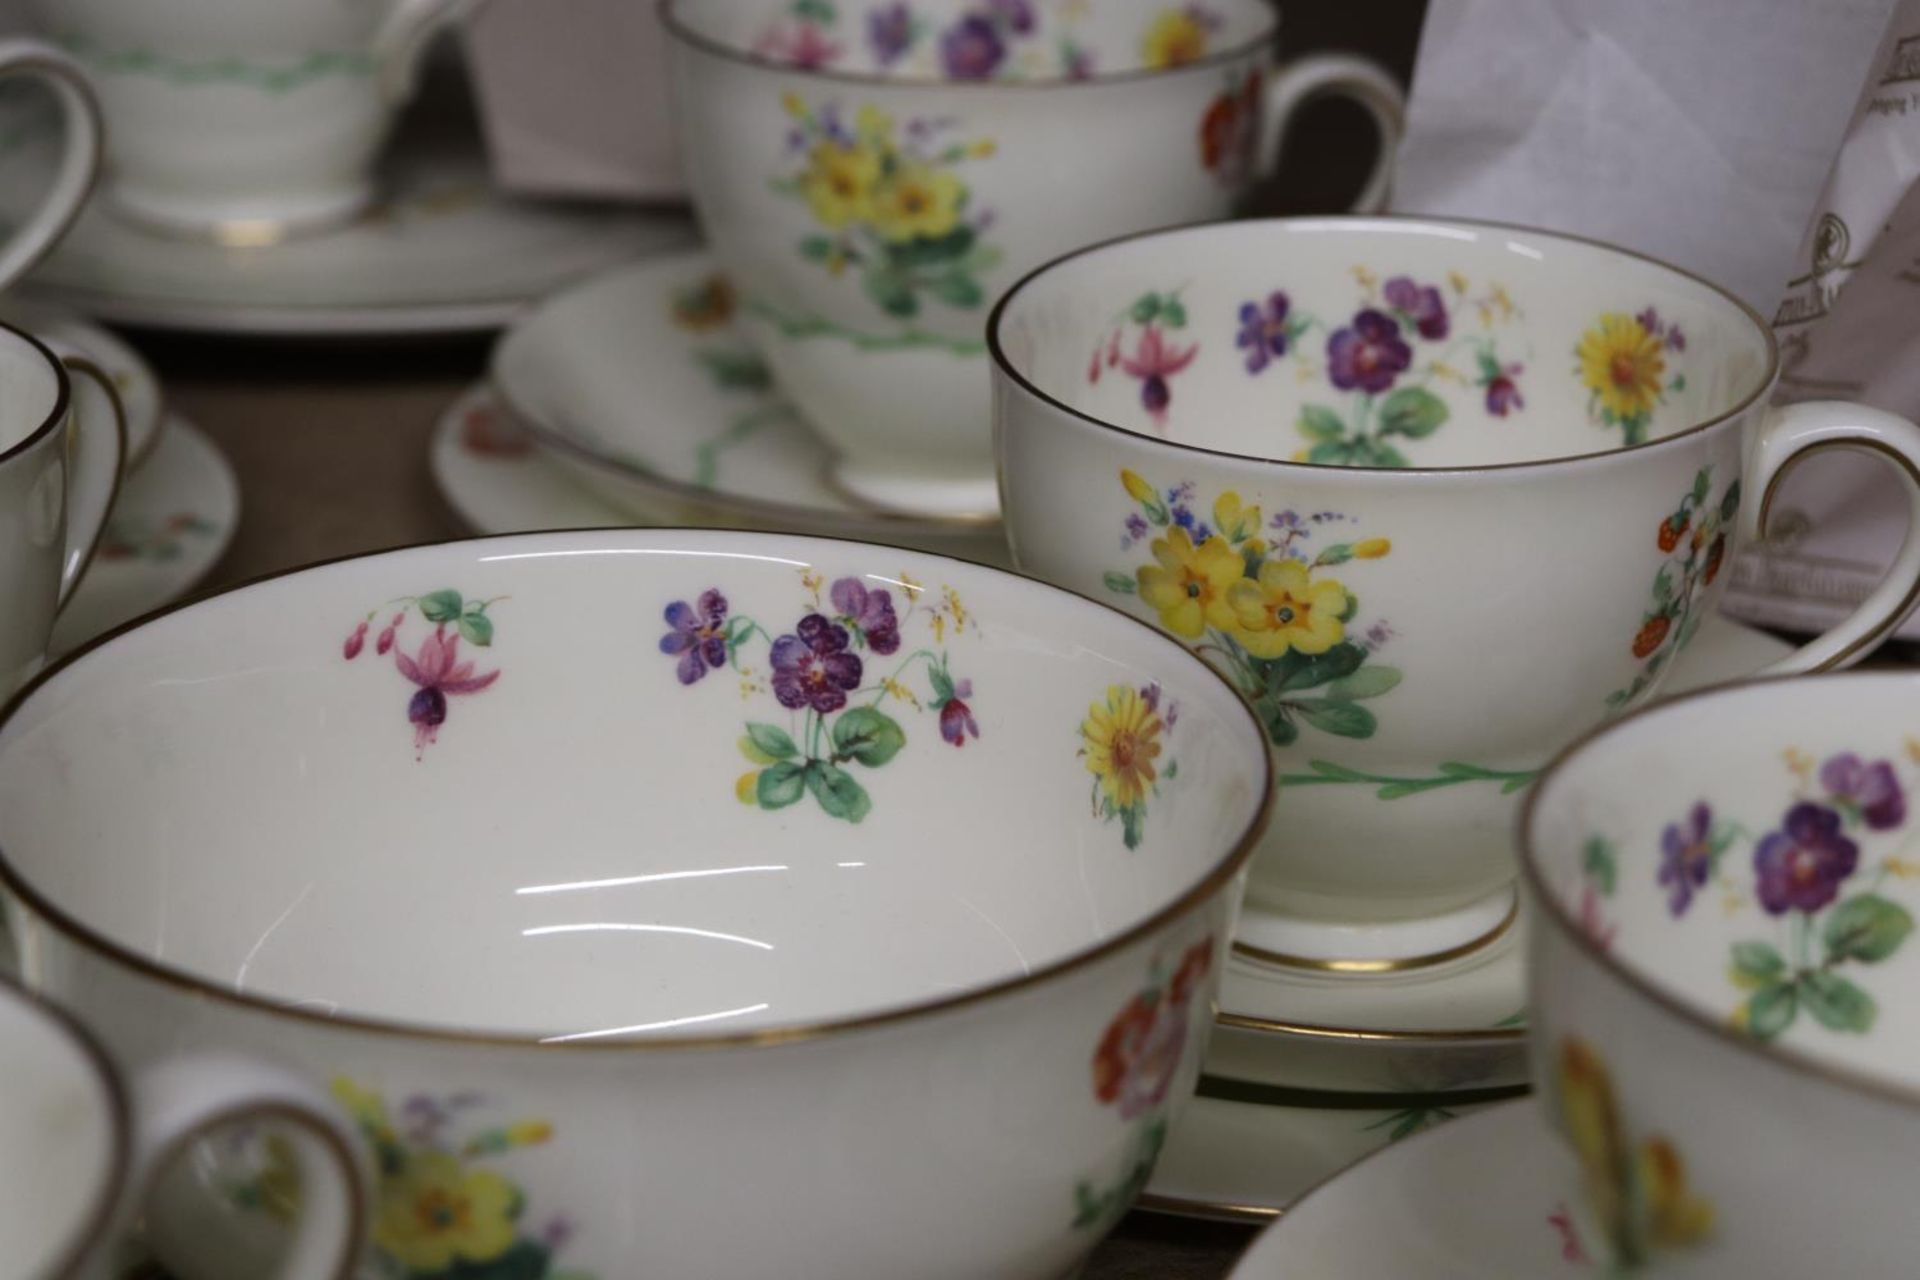 A VINTAGE ROYAL DOULTON TEASET, PALE YELLOW WITH SPRING FLOWERS, TO INCLUDE A CREAM JUG, SUGAR BOWL, - Image 5 of 6